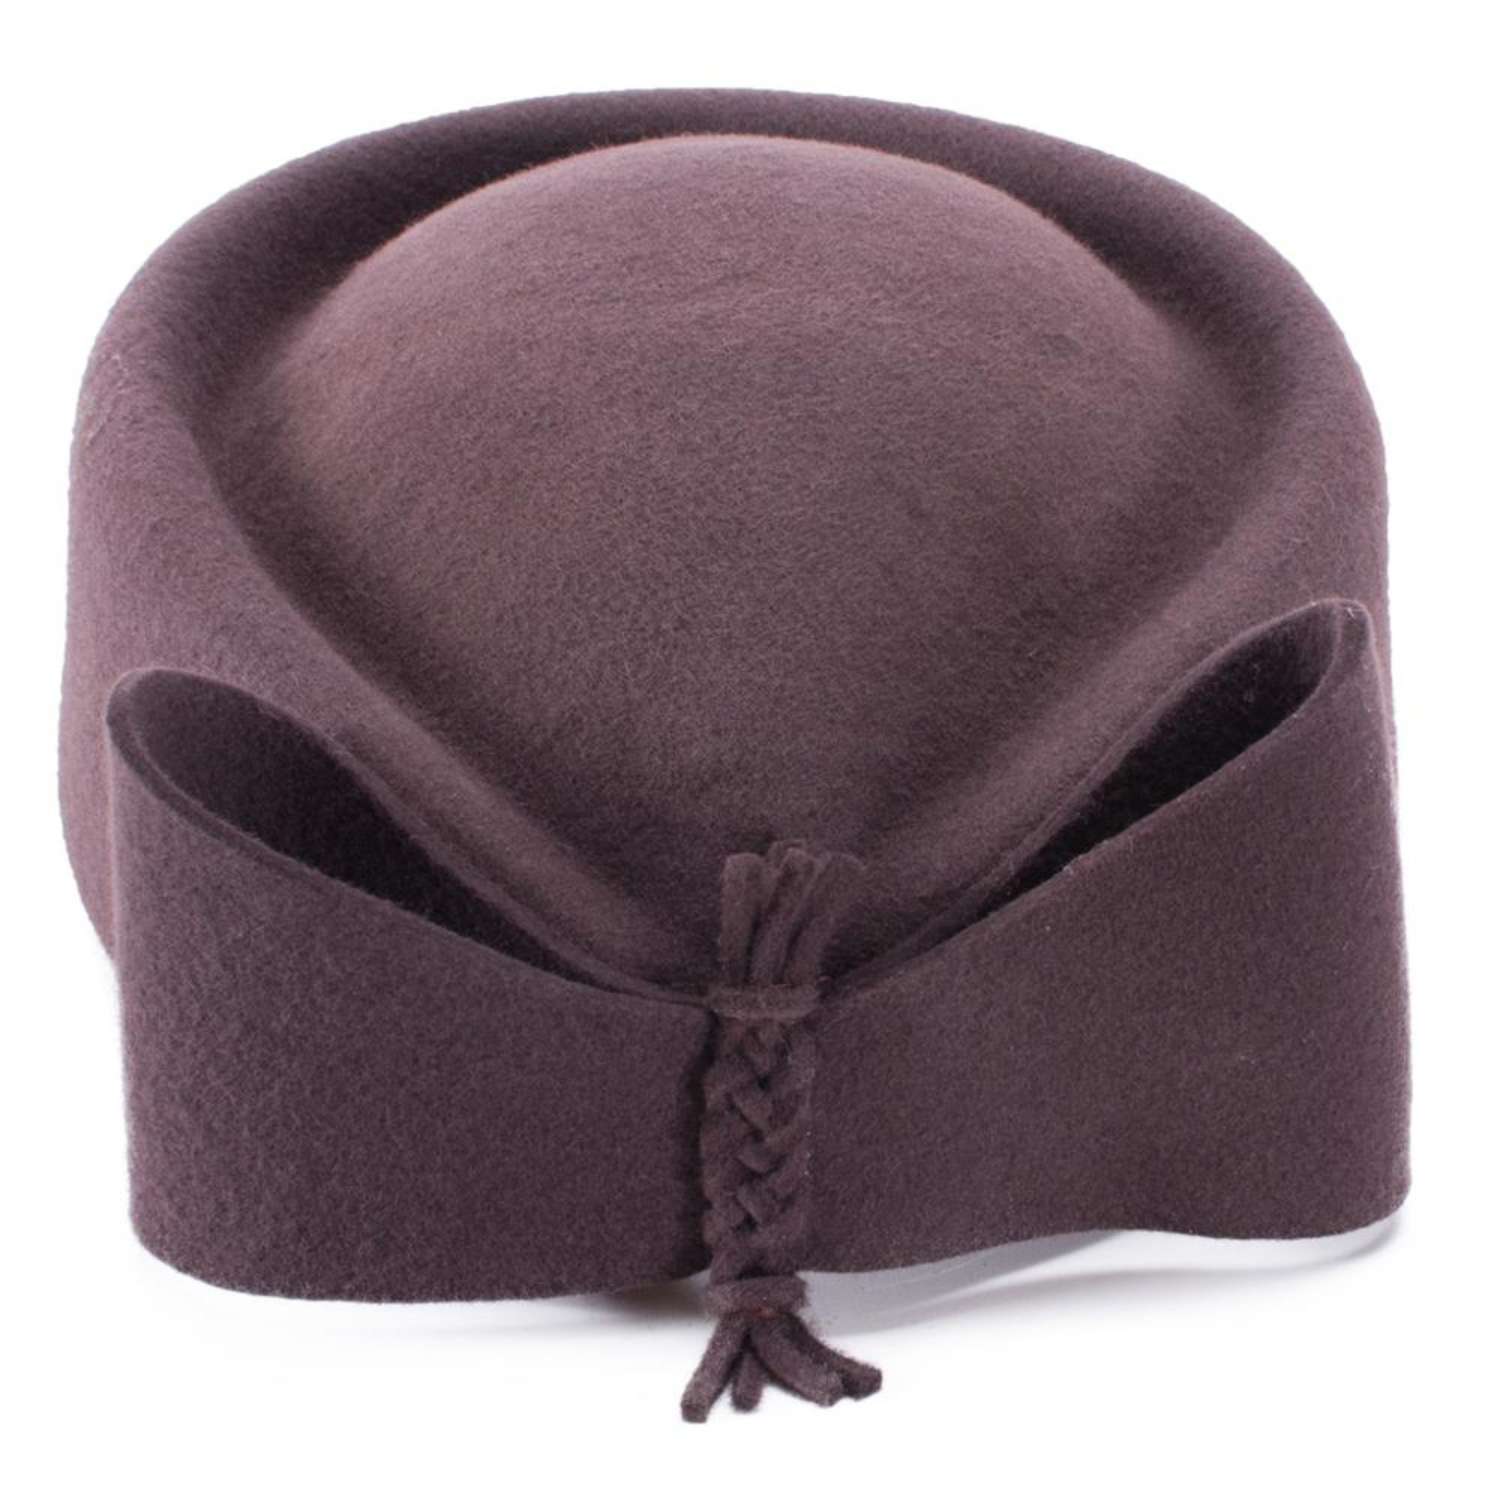 Pillbox hat with a bow 100% wool